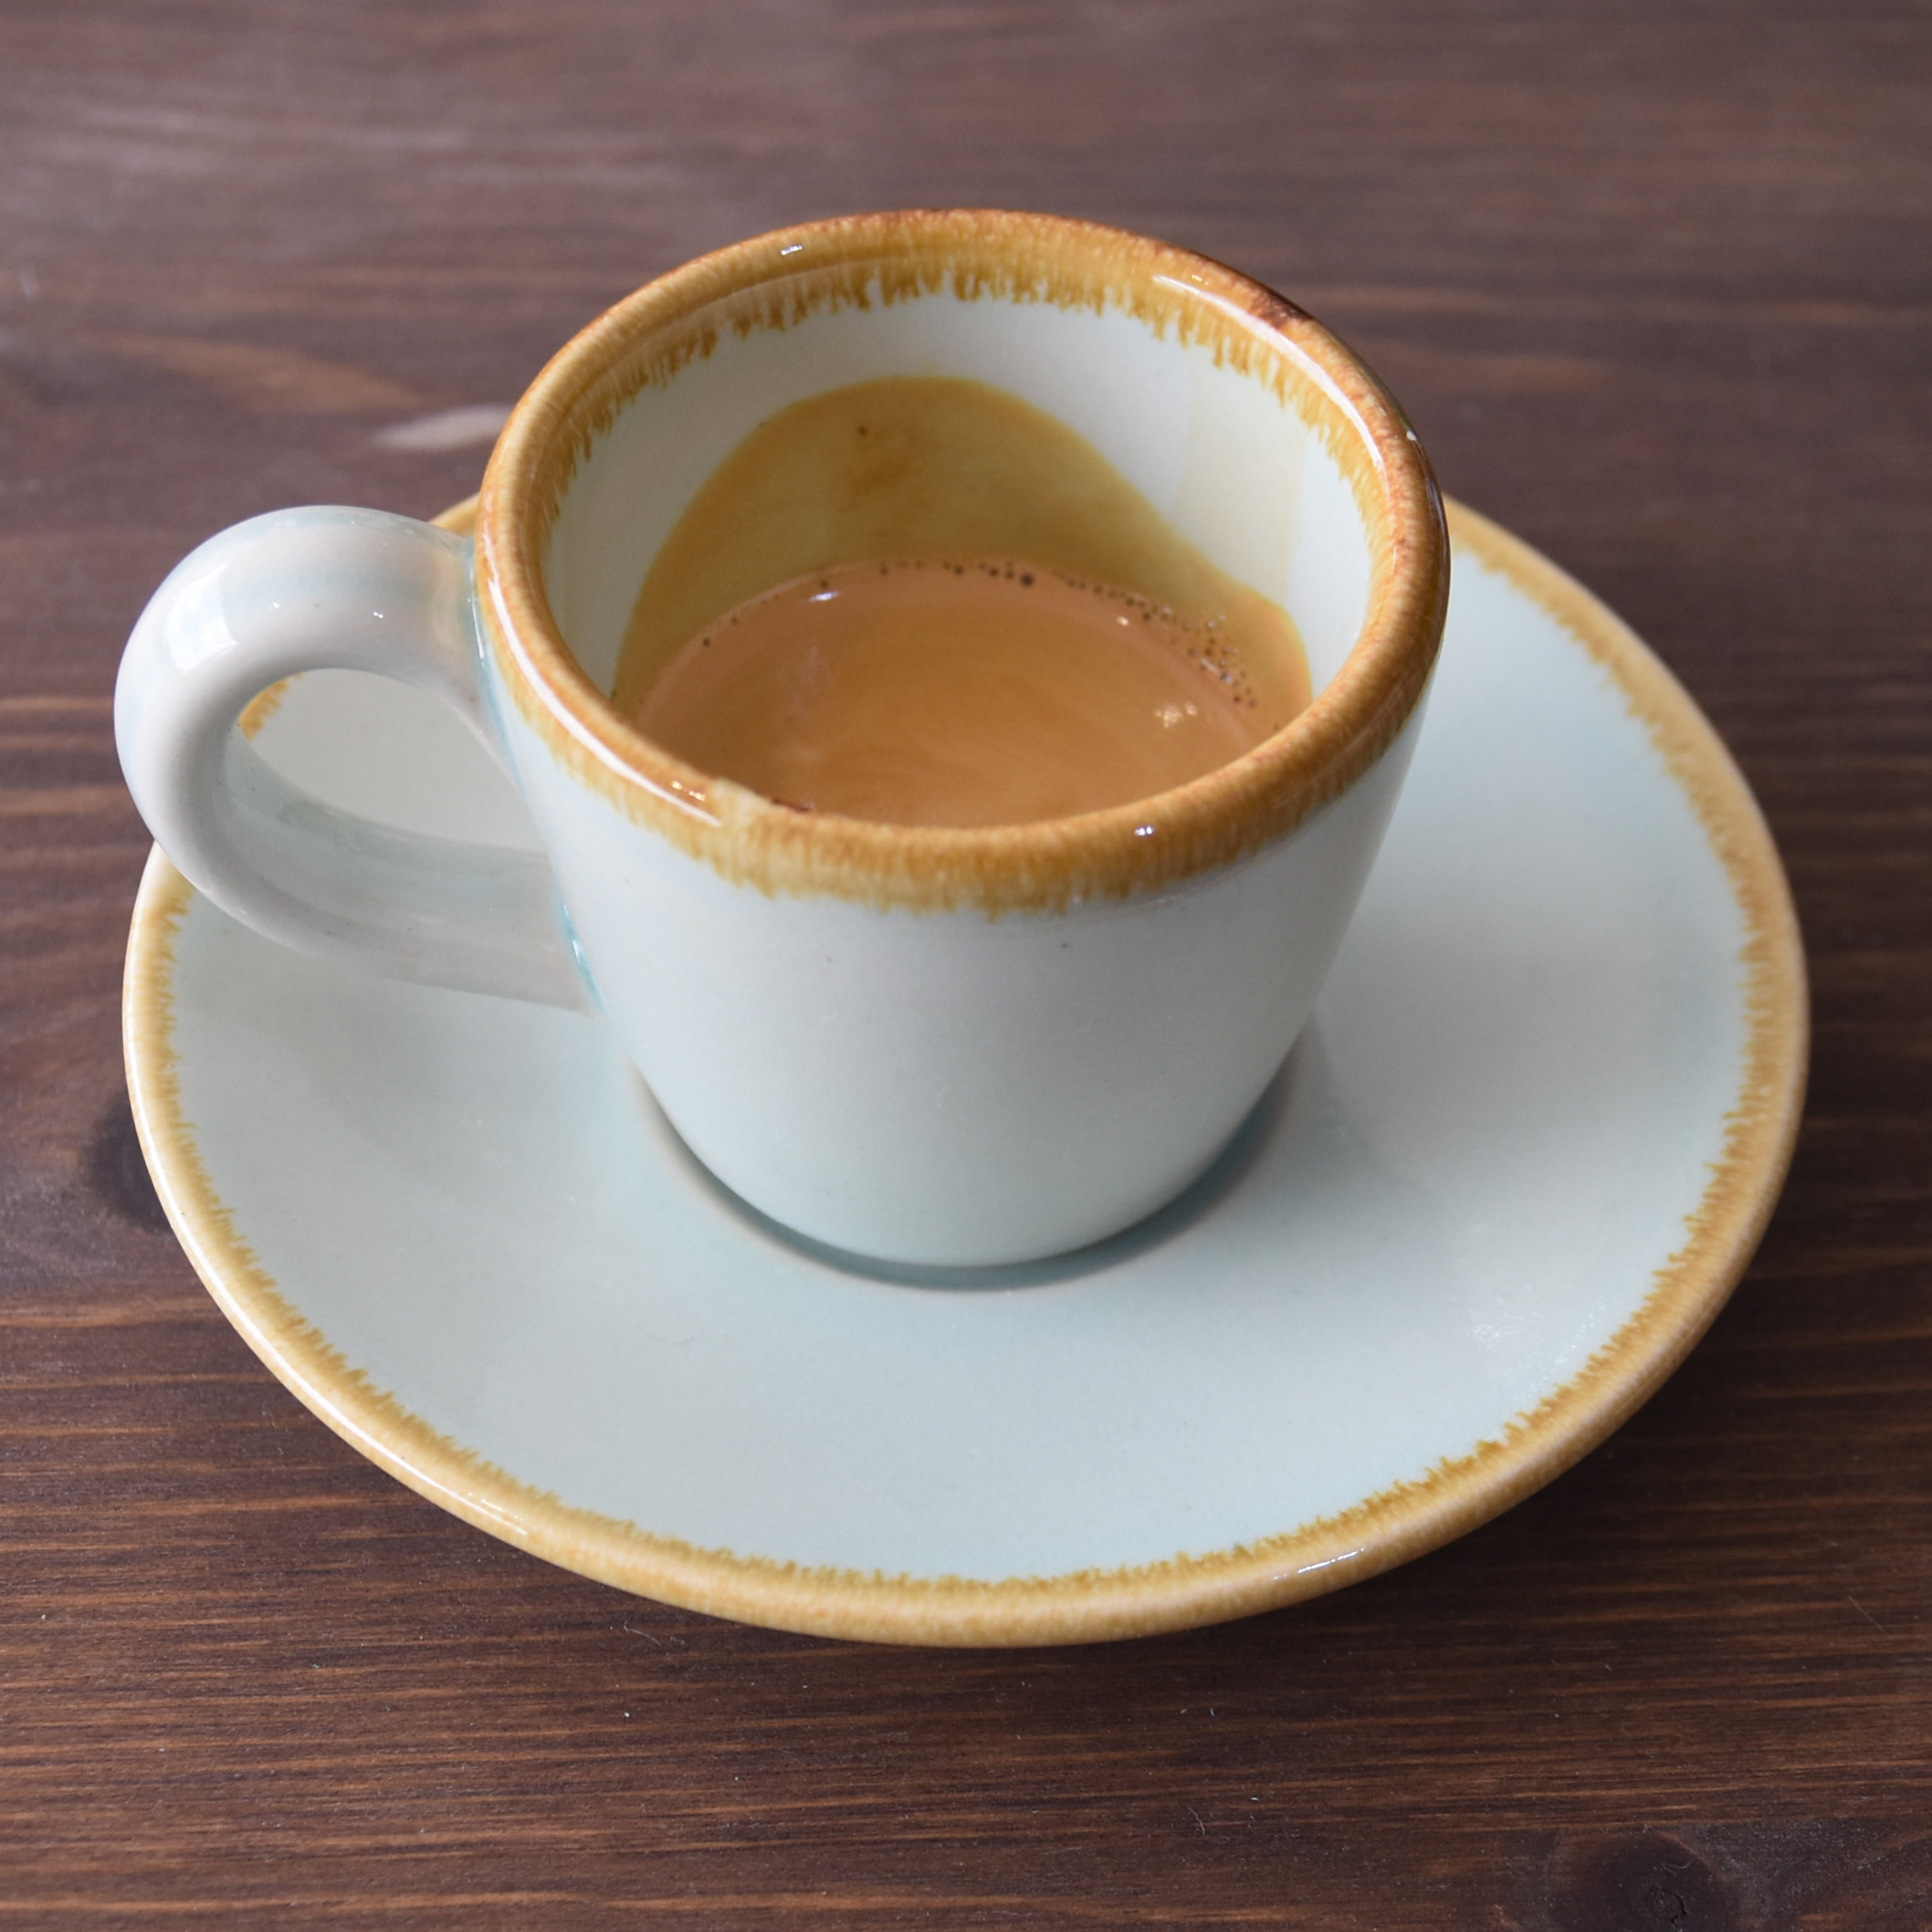 A classic espresso in a handmade cup from Surrey Ceramics, served at The Hideaway in Guildford.